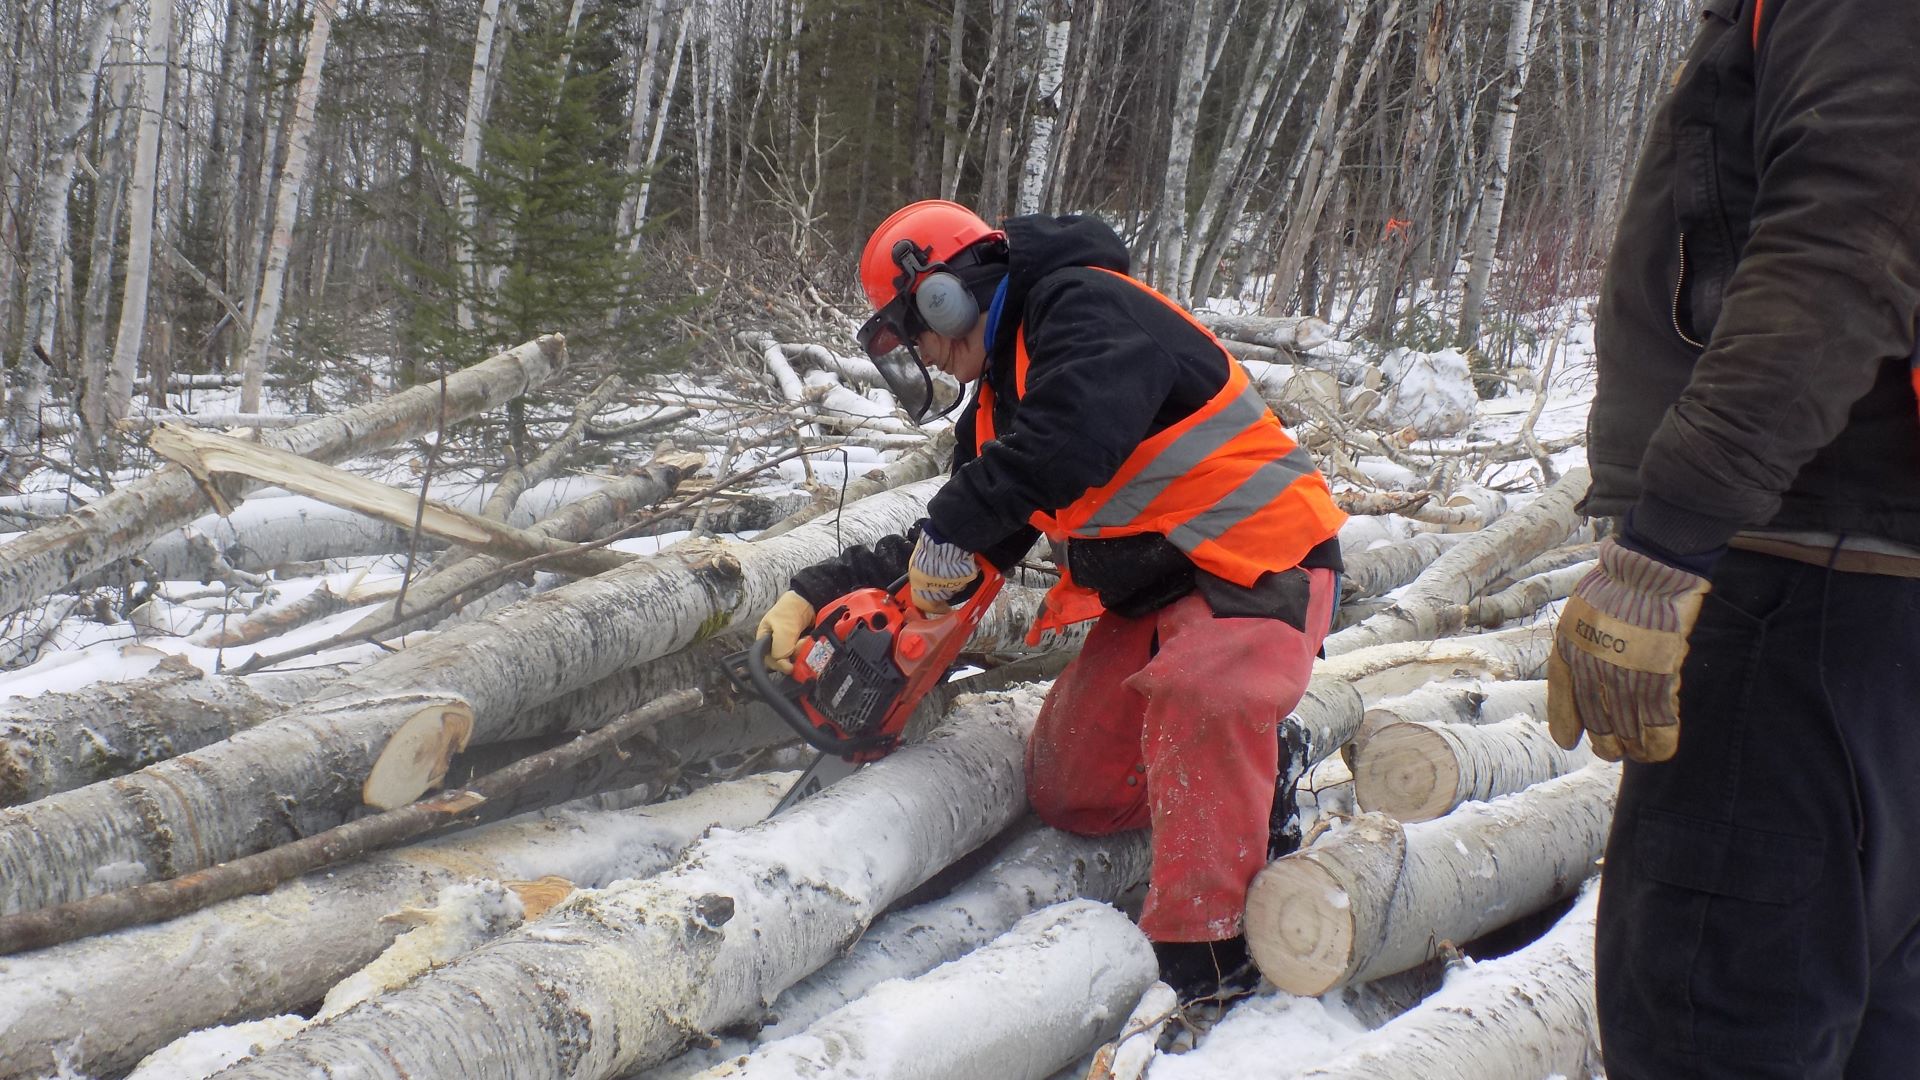 A student operates a chainsaw to cut up timber.